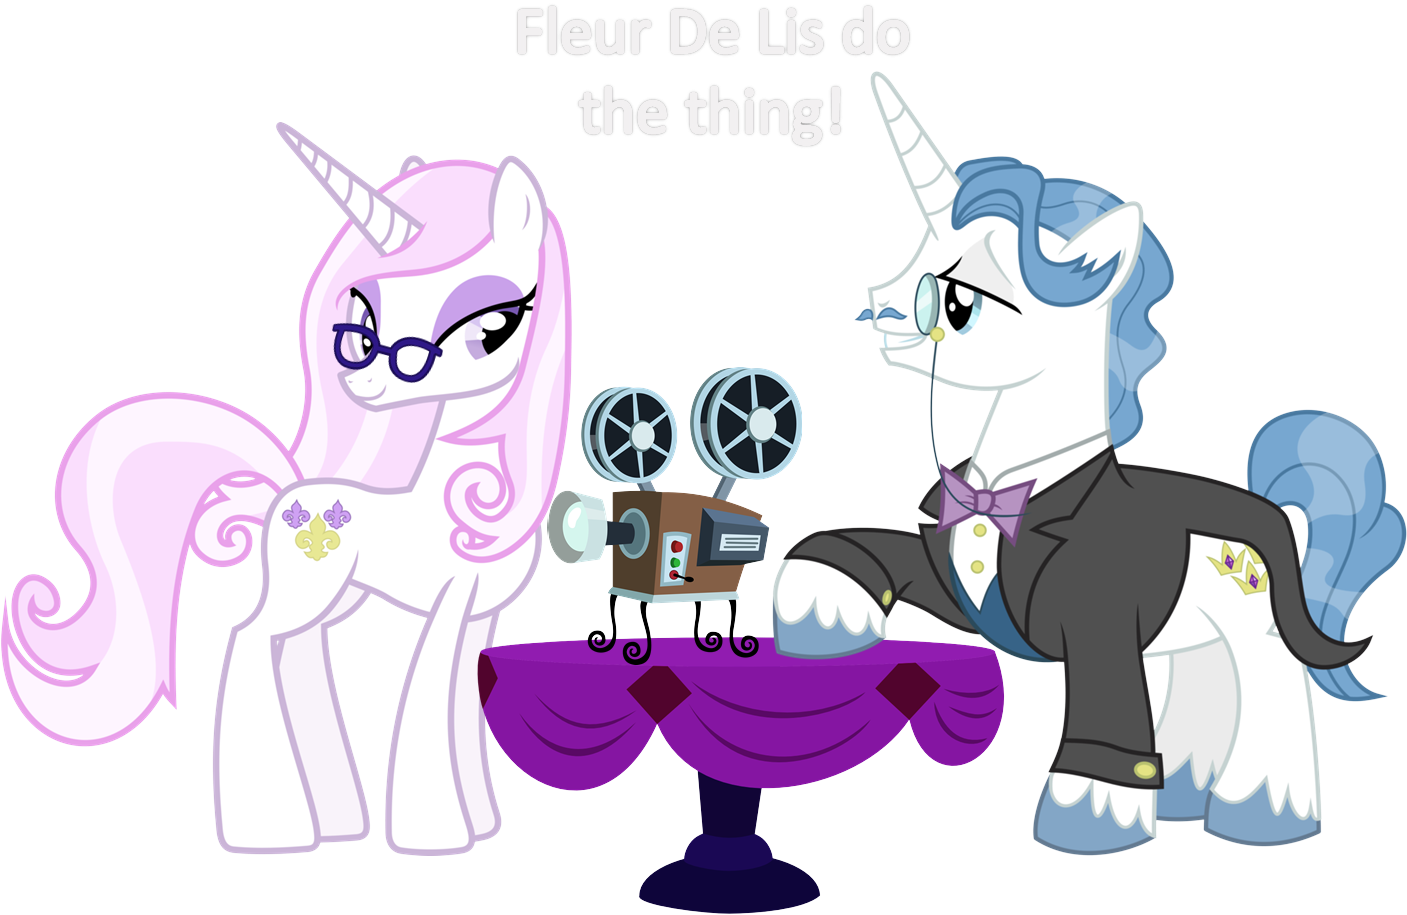 Do The Thingwith Ponies By Bronybyexception - Fancy Pants Pony (1406x964)